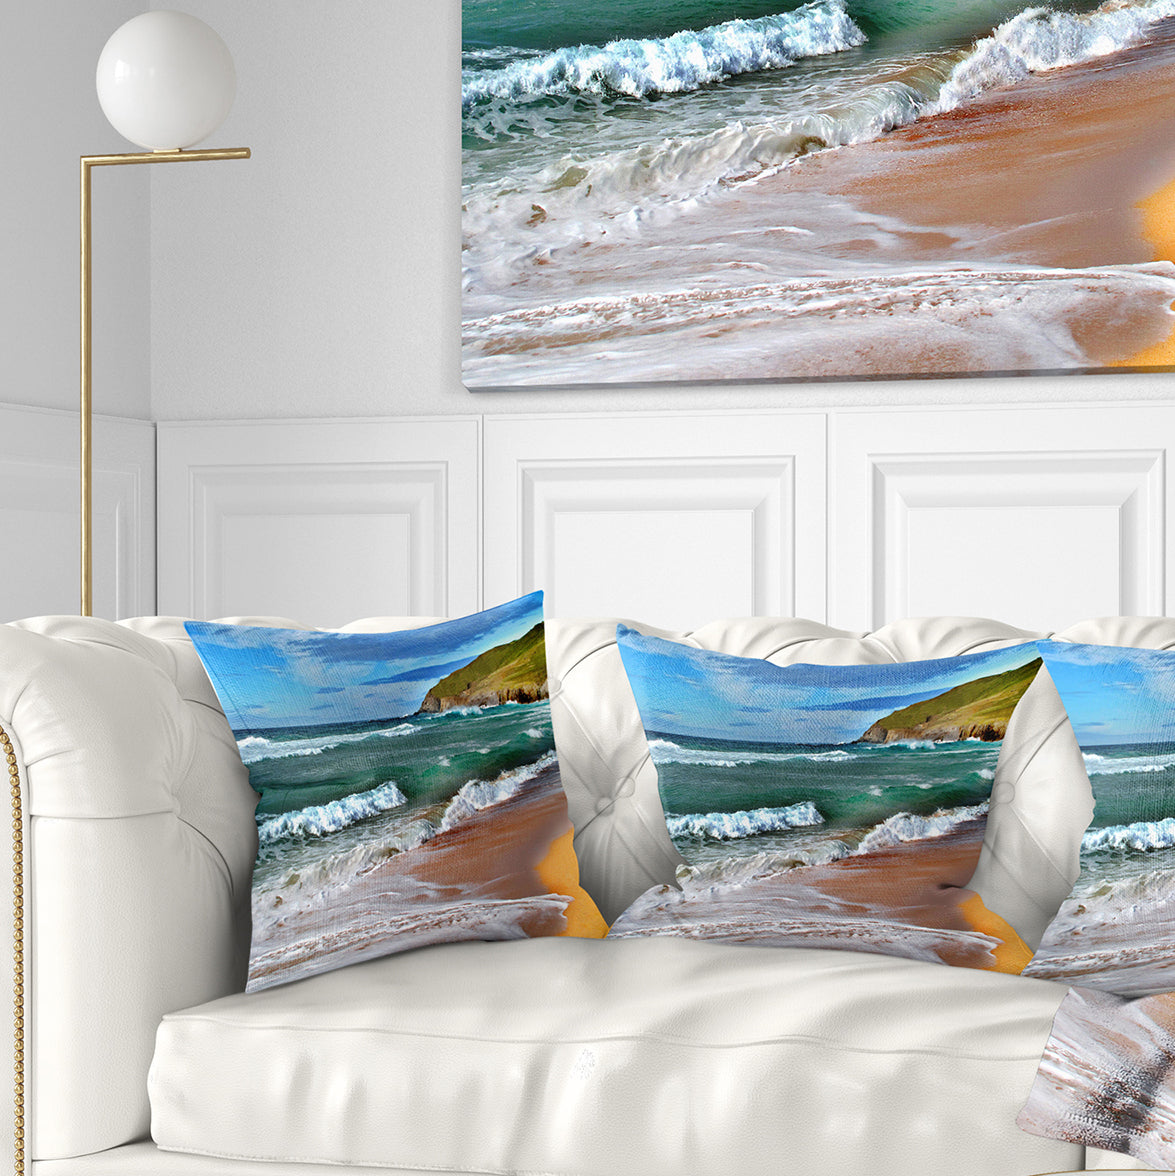 Blue Sea with Warm Waves - Seascape Throw Pillow